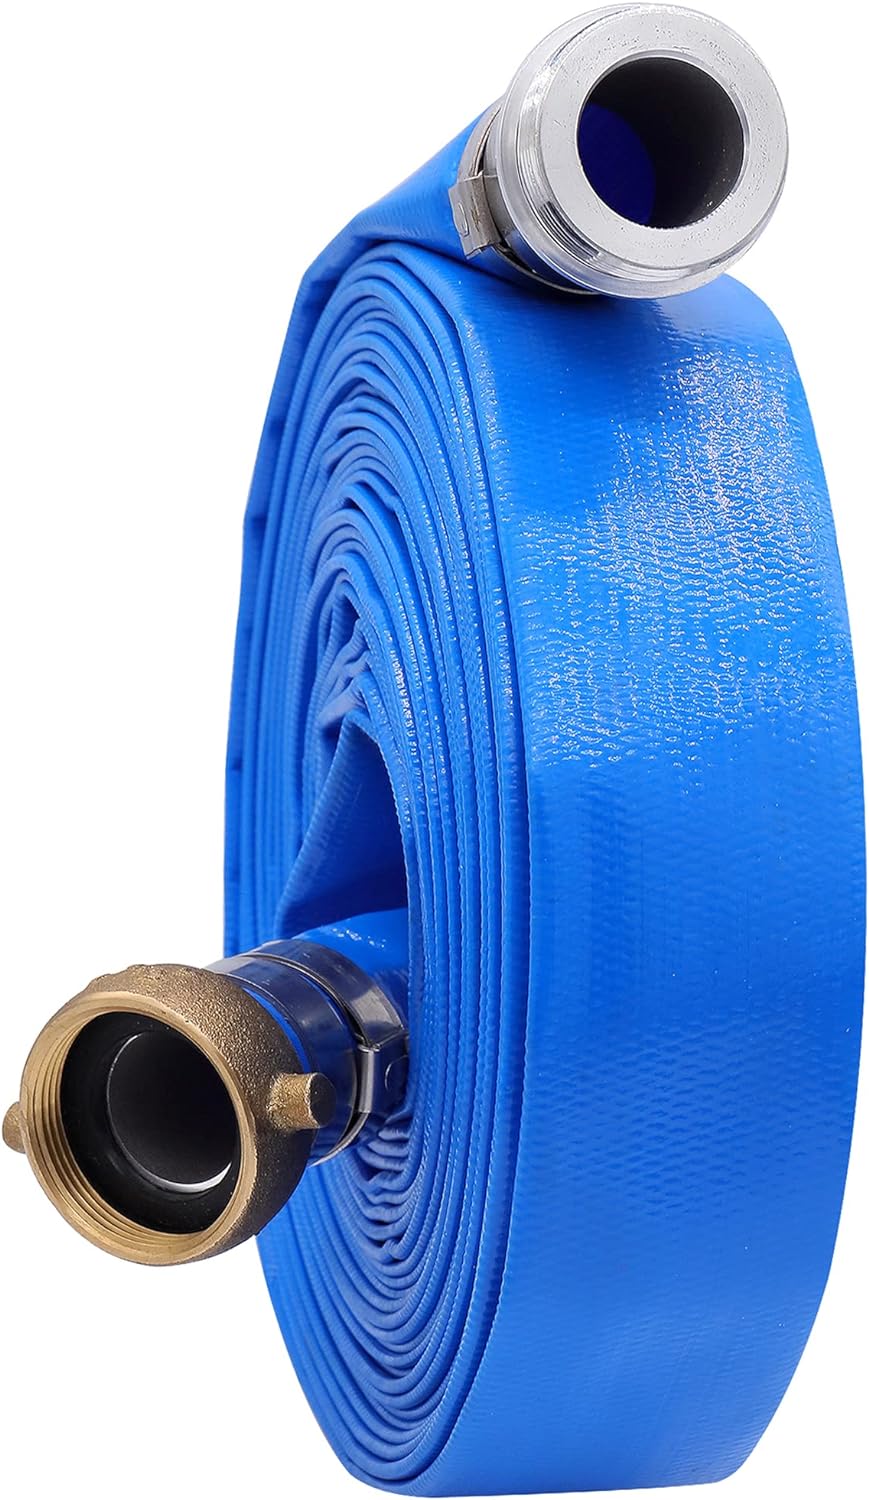 Pentair Discharge Hose (2in. x 50ft.) w/ Stainless Steel Clamp || R221220